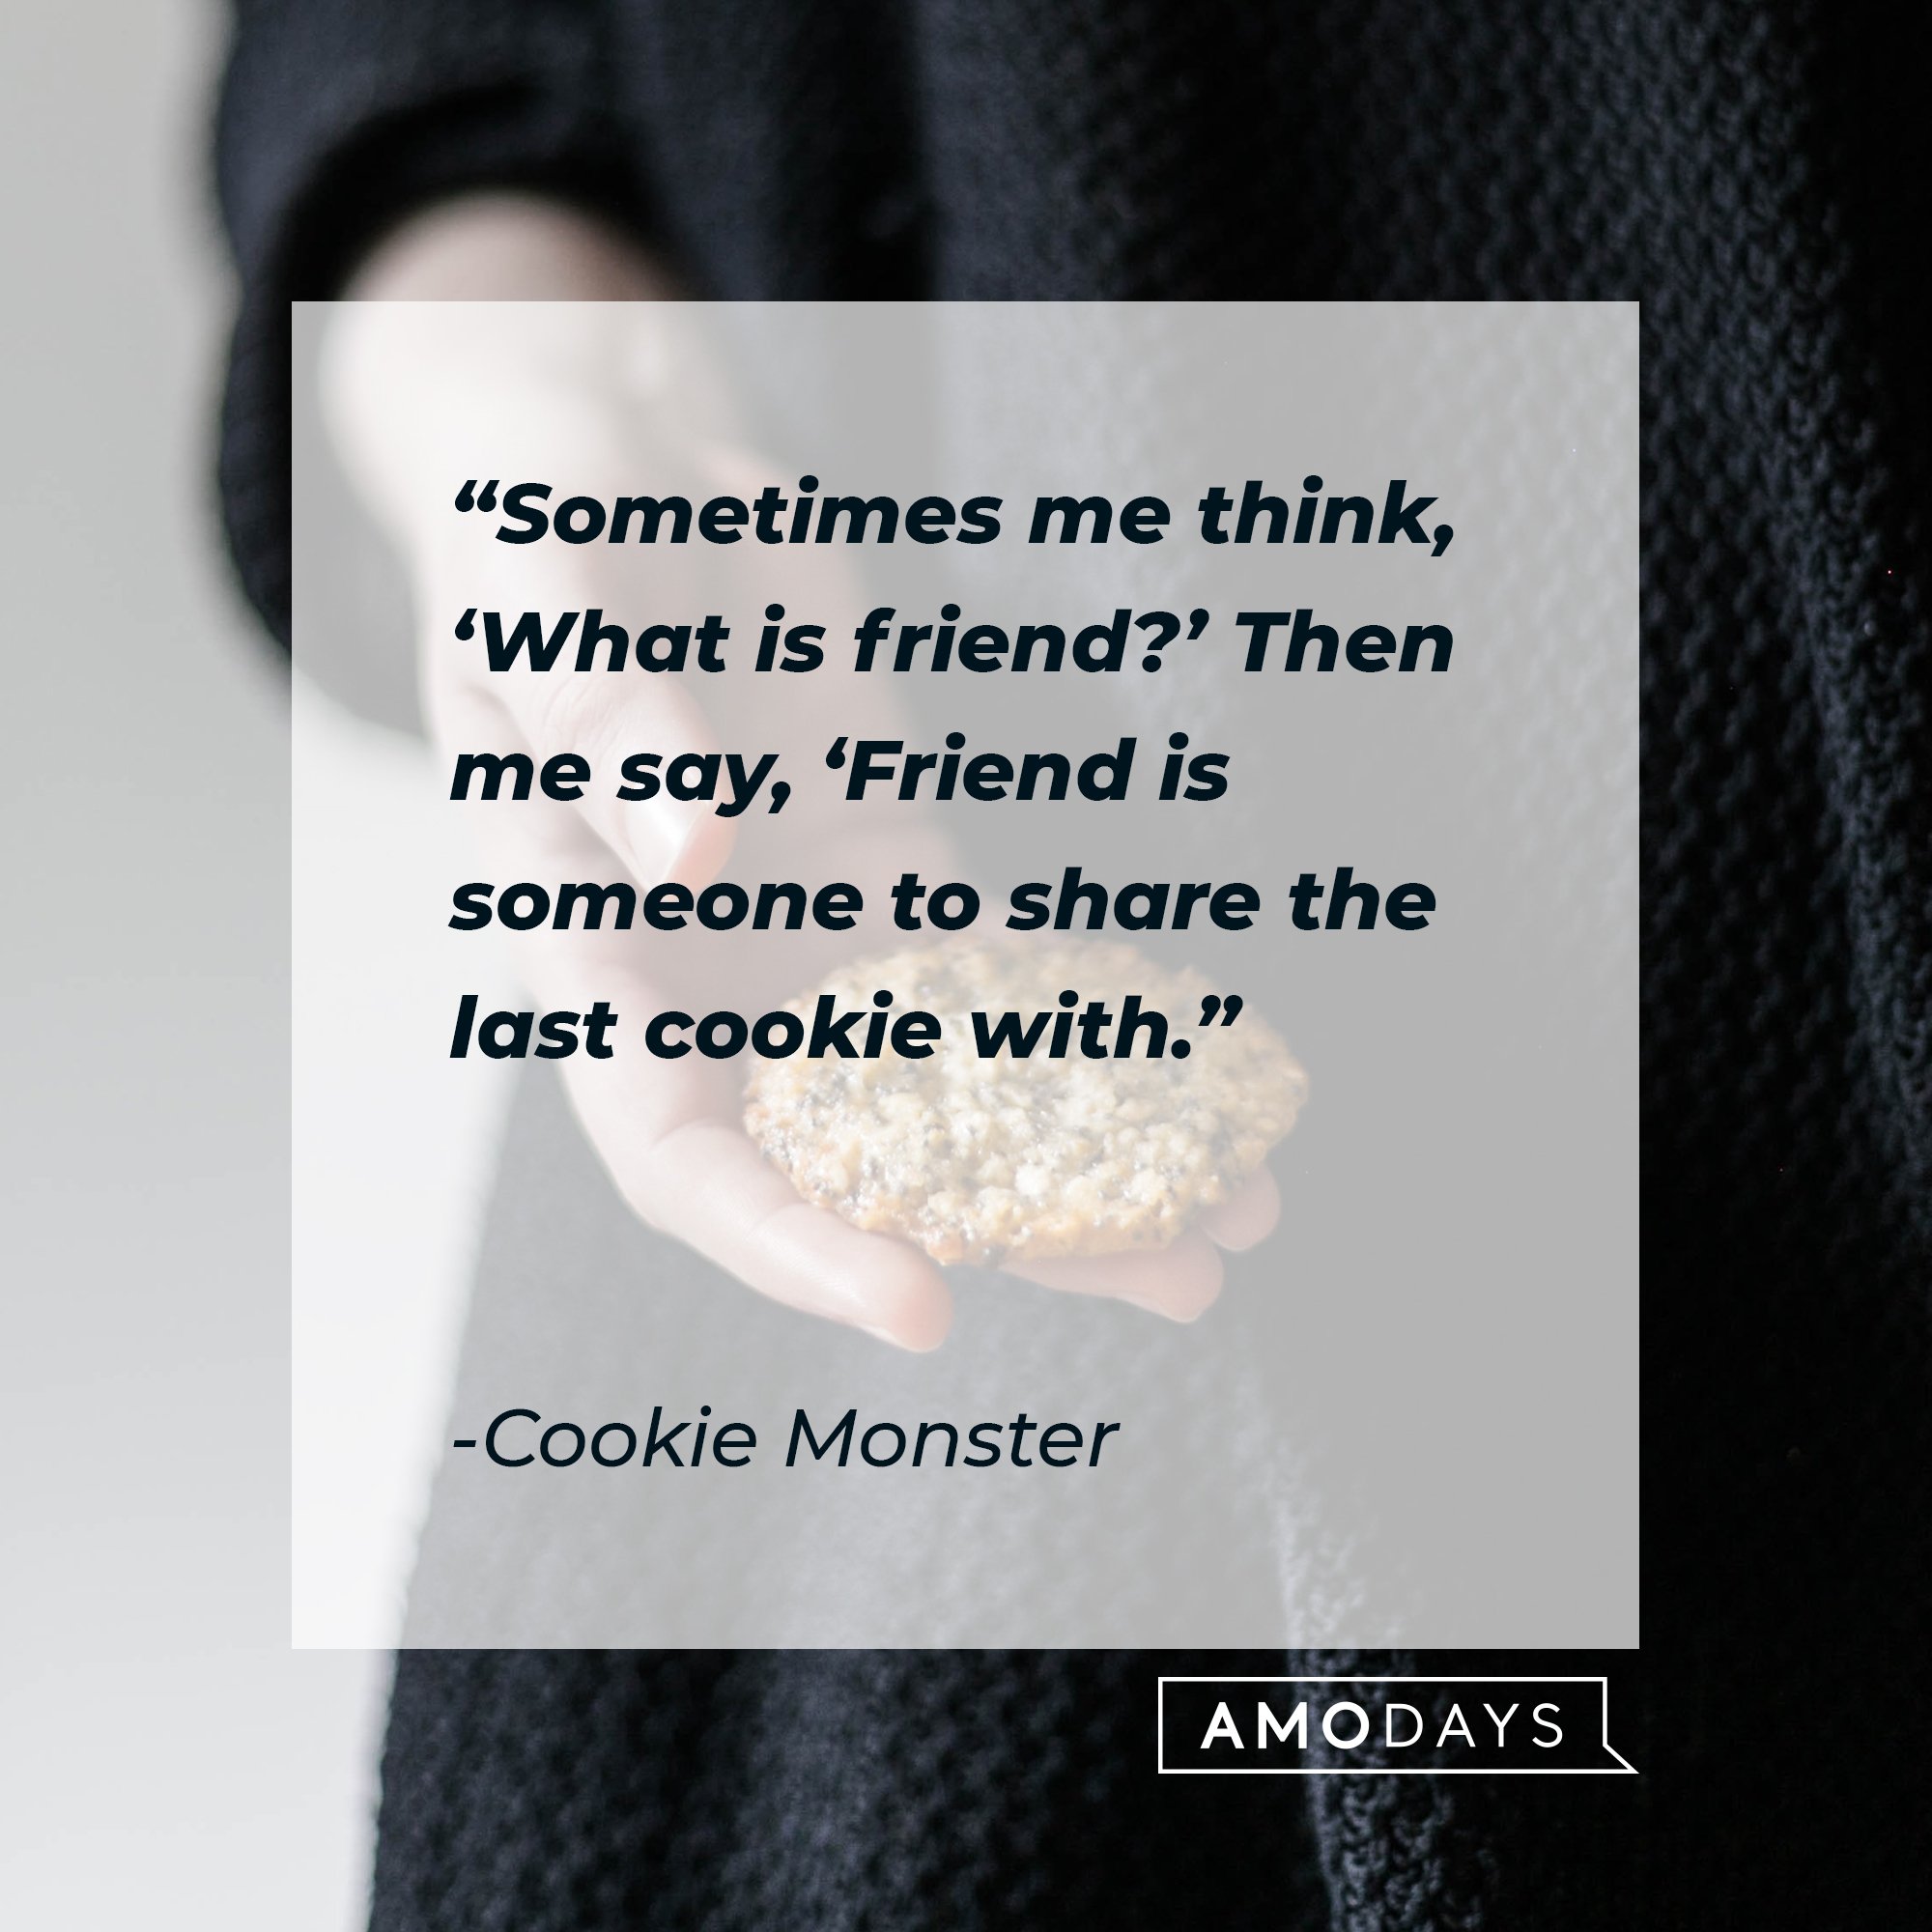 Cookie Monster’s quote: “Sometimes me think, ‘What is friend?’ Then me say, ‘Friend is someone to share the last cookie with.’” | Image: AmoDays